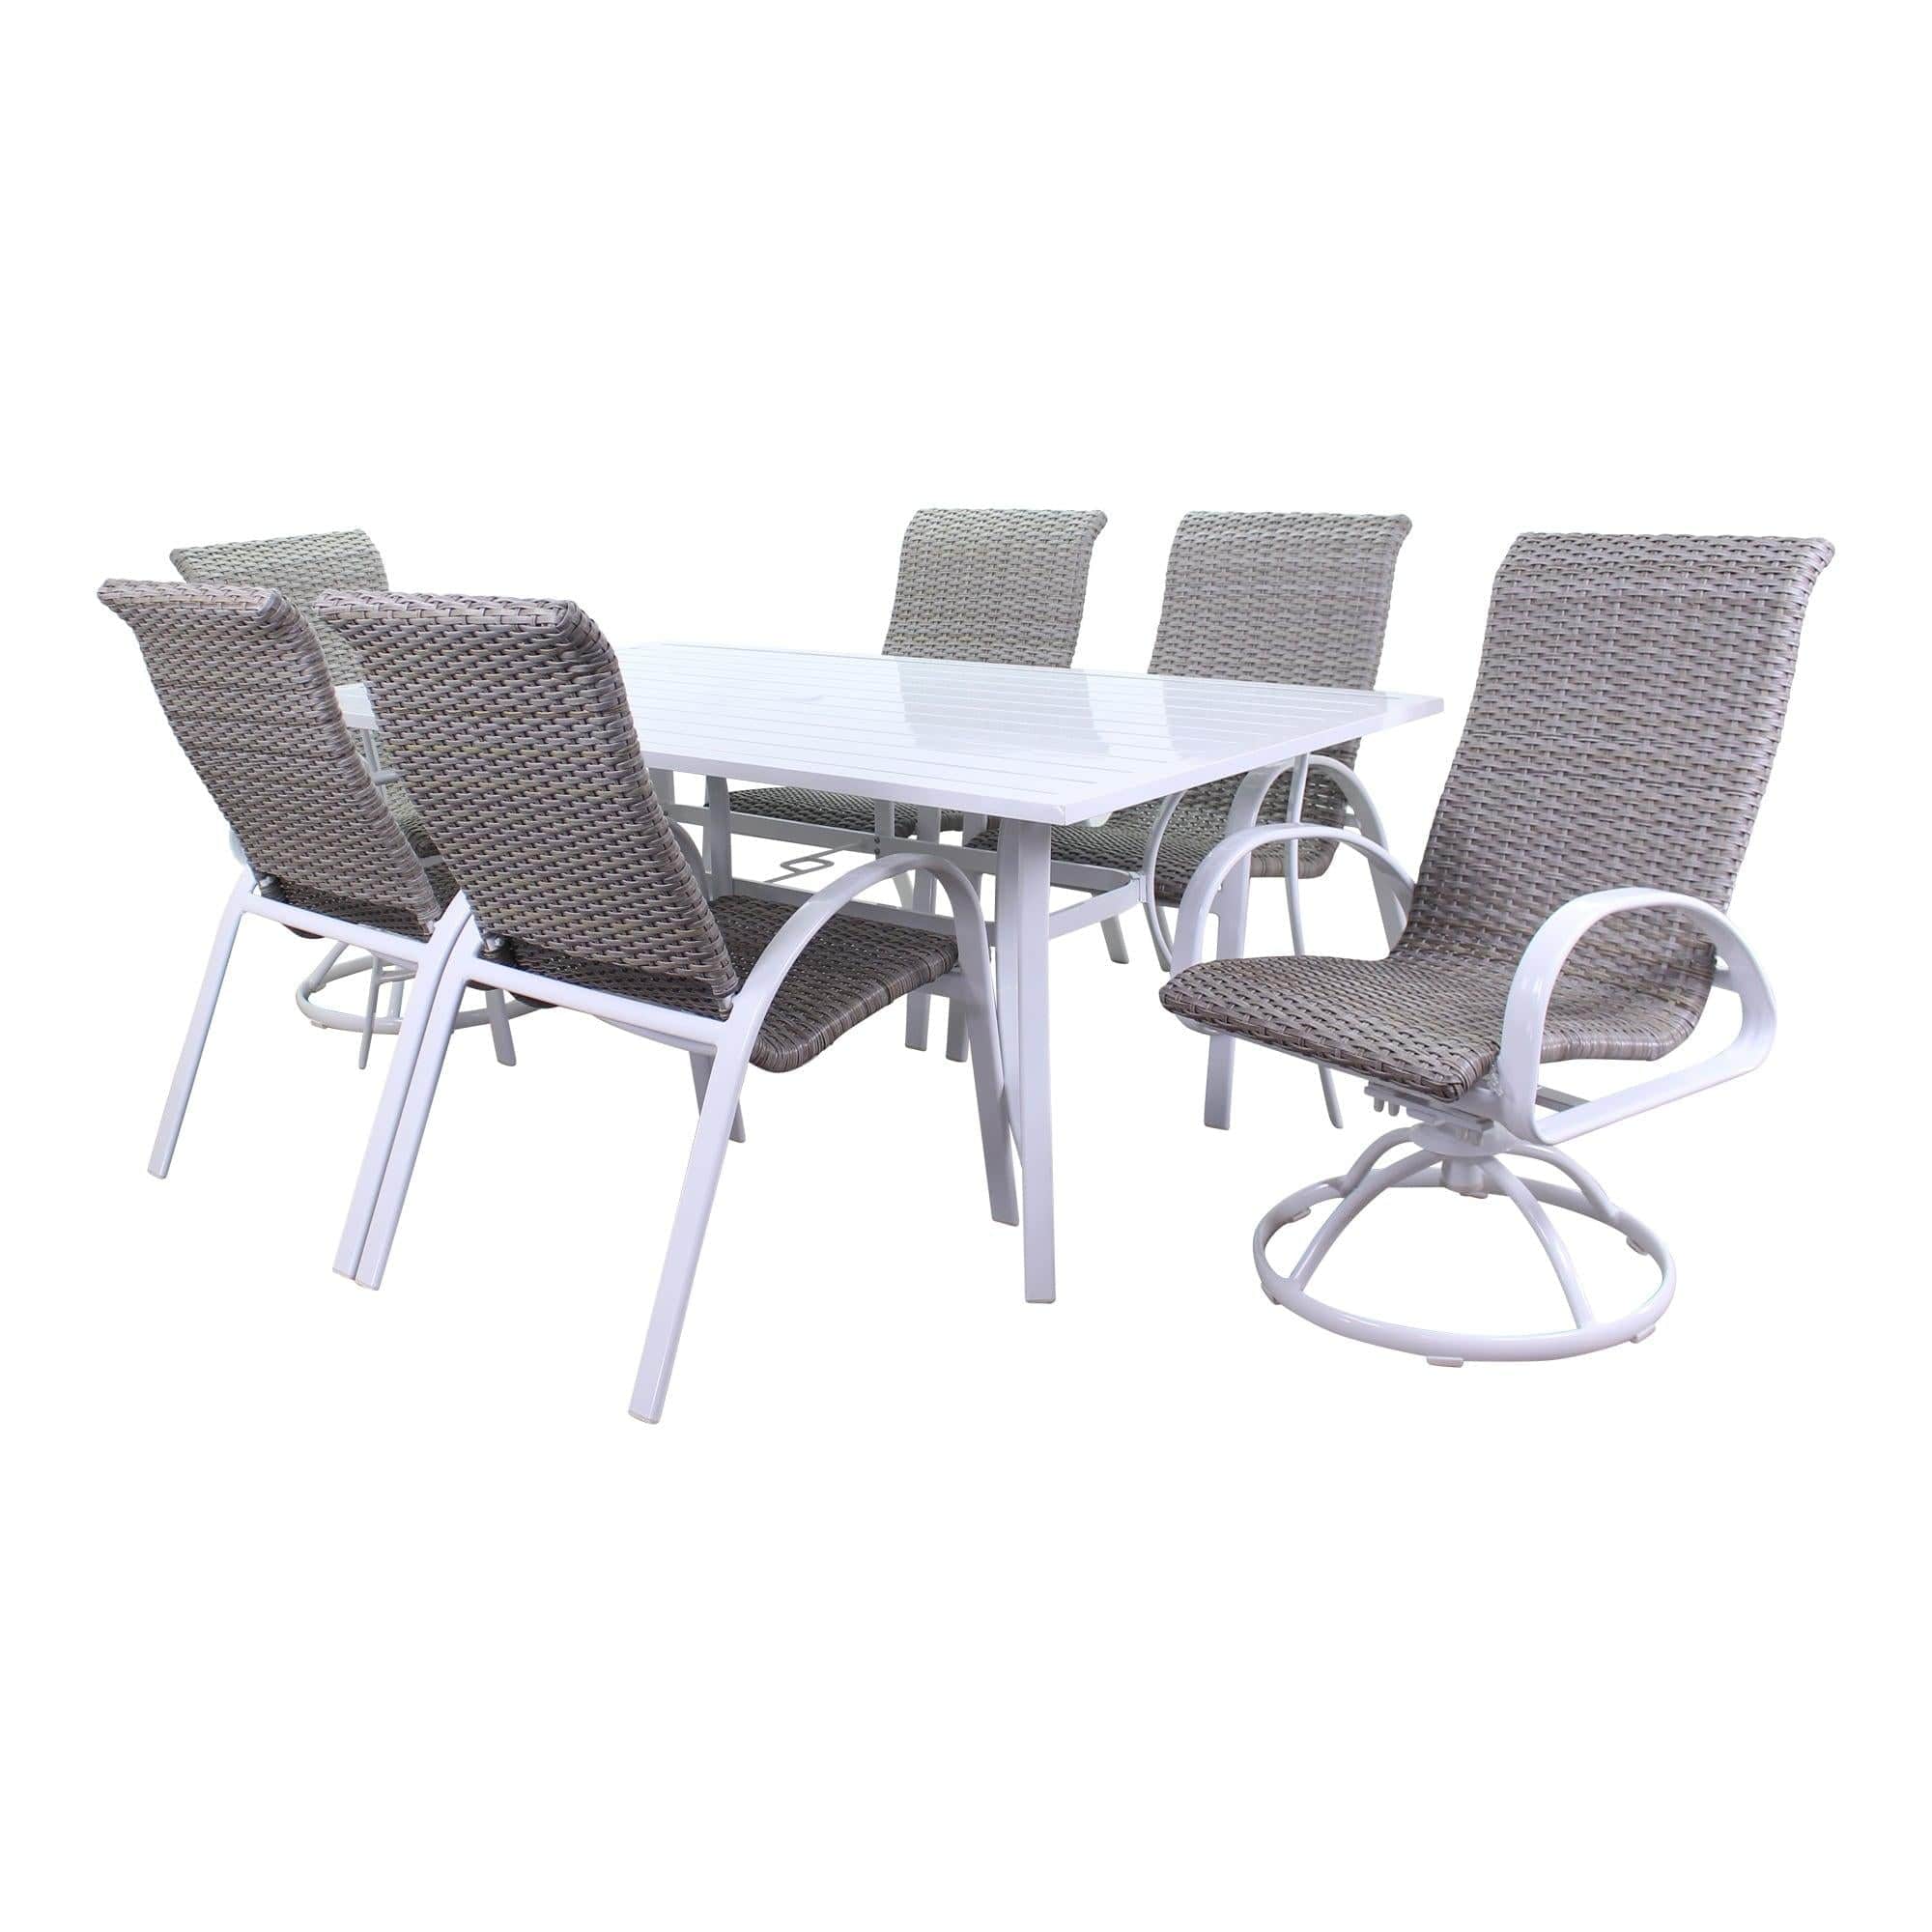 Courtyard Casual Outdoor Dining Set Courtyard Casual -  Santa Fe 7 pc Mixed Dining Set in White with 72" Rectangle Table, 2 Swivel Rockers and 4 Wicker Chairs | 5910